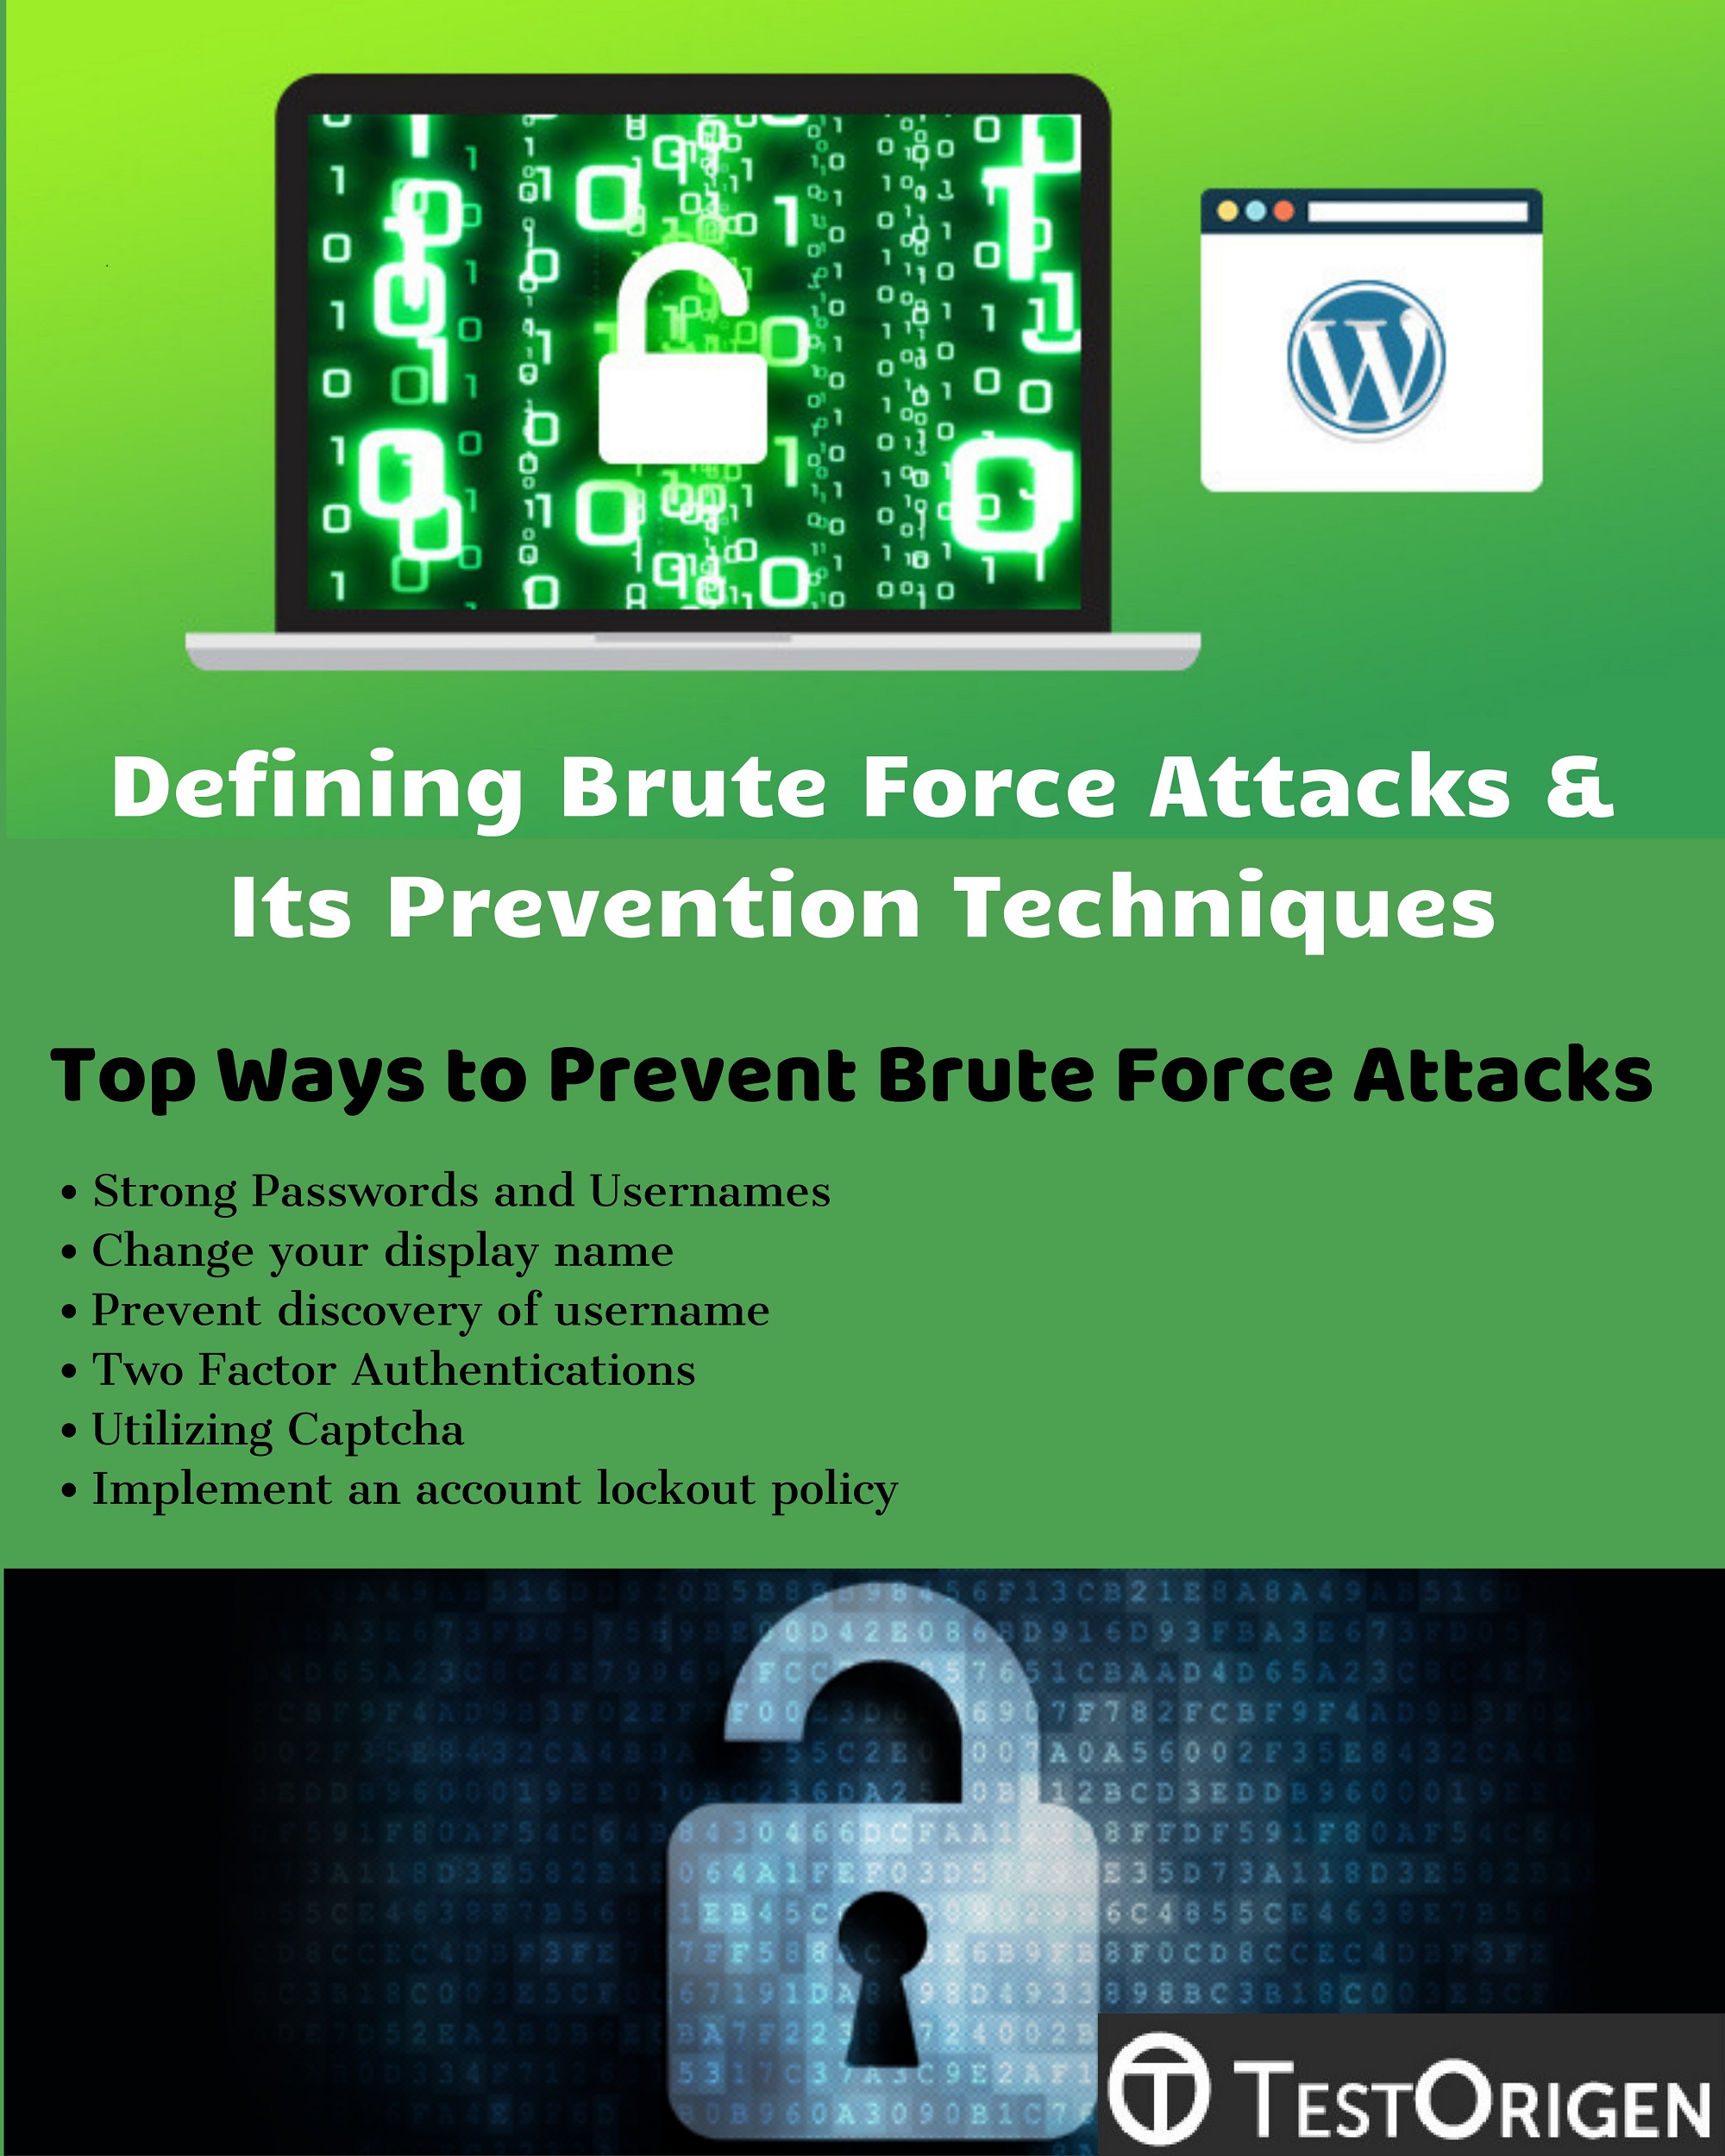 Defining Brute Force Attacks & Its Prevention Techniques